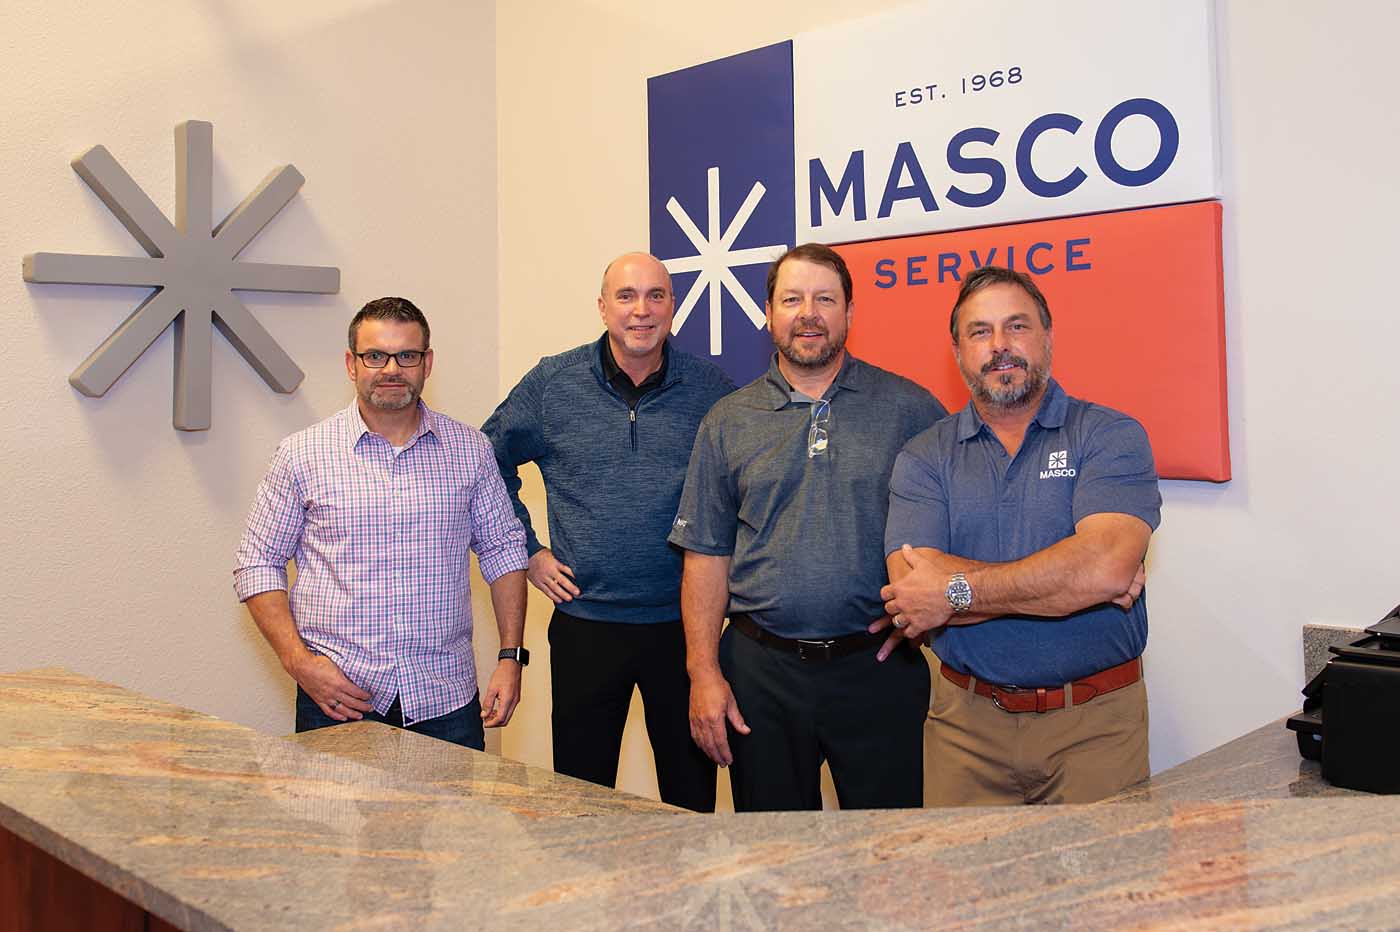 News :: Vertical Magazine News :: Behind the scenes with Masco